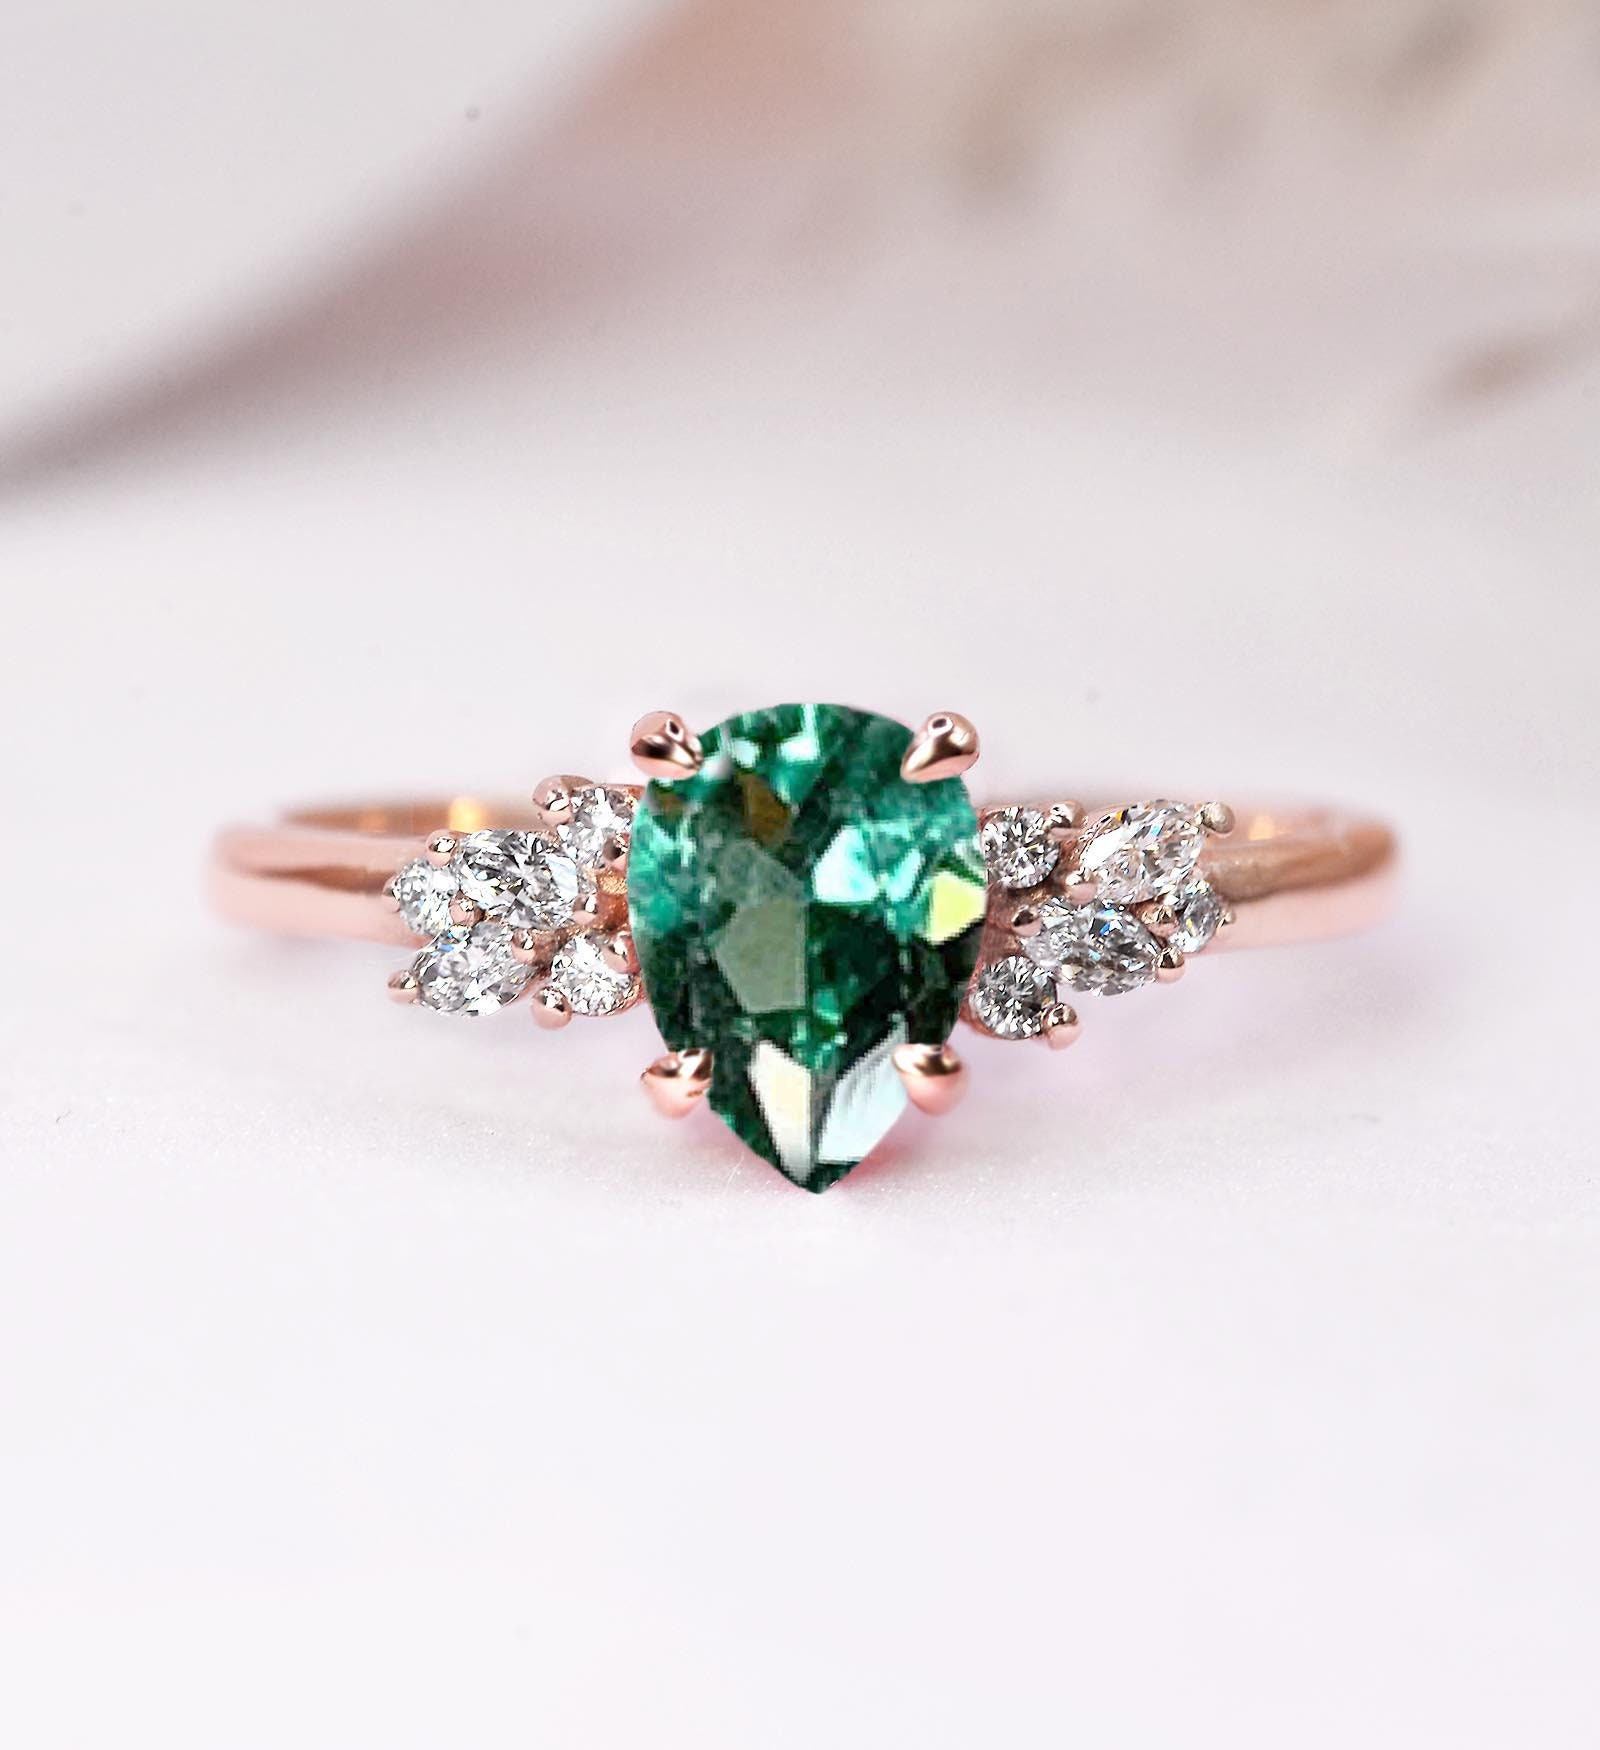 6 X 8mm Pear Green Tourmaline & Diamond Engagement Ring | Wedding, Bridal Anniversary Cluster in Rose Gold For Her